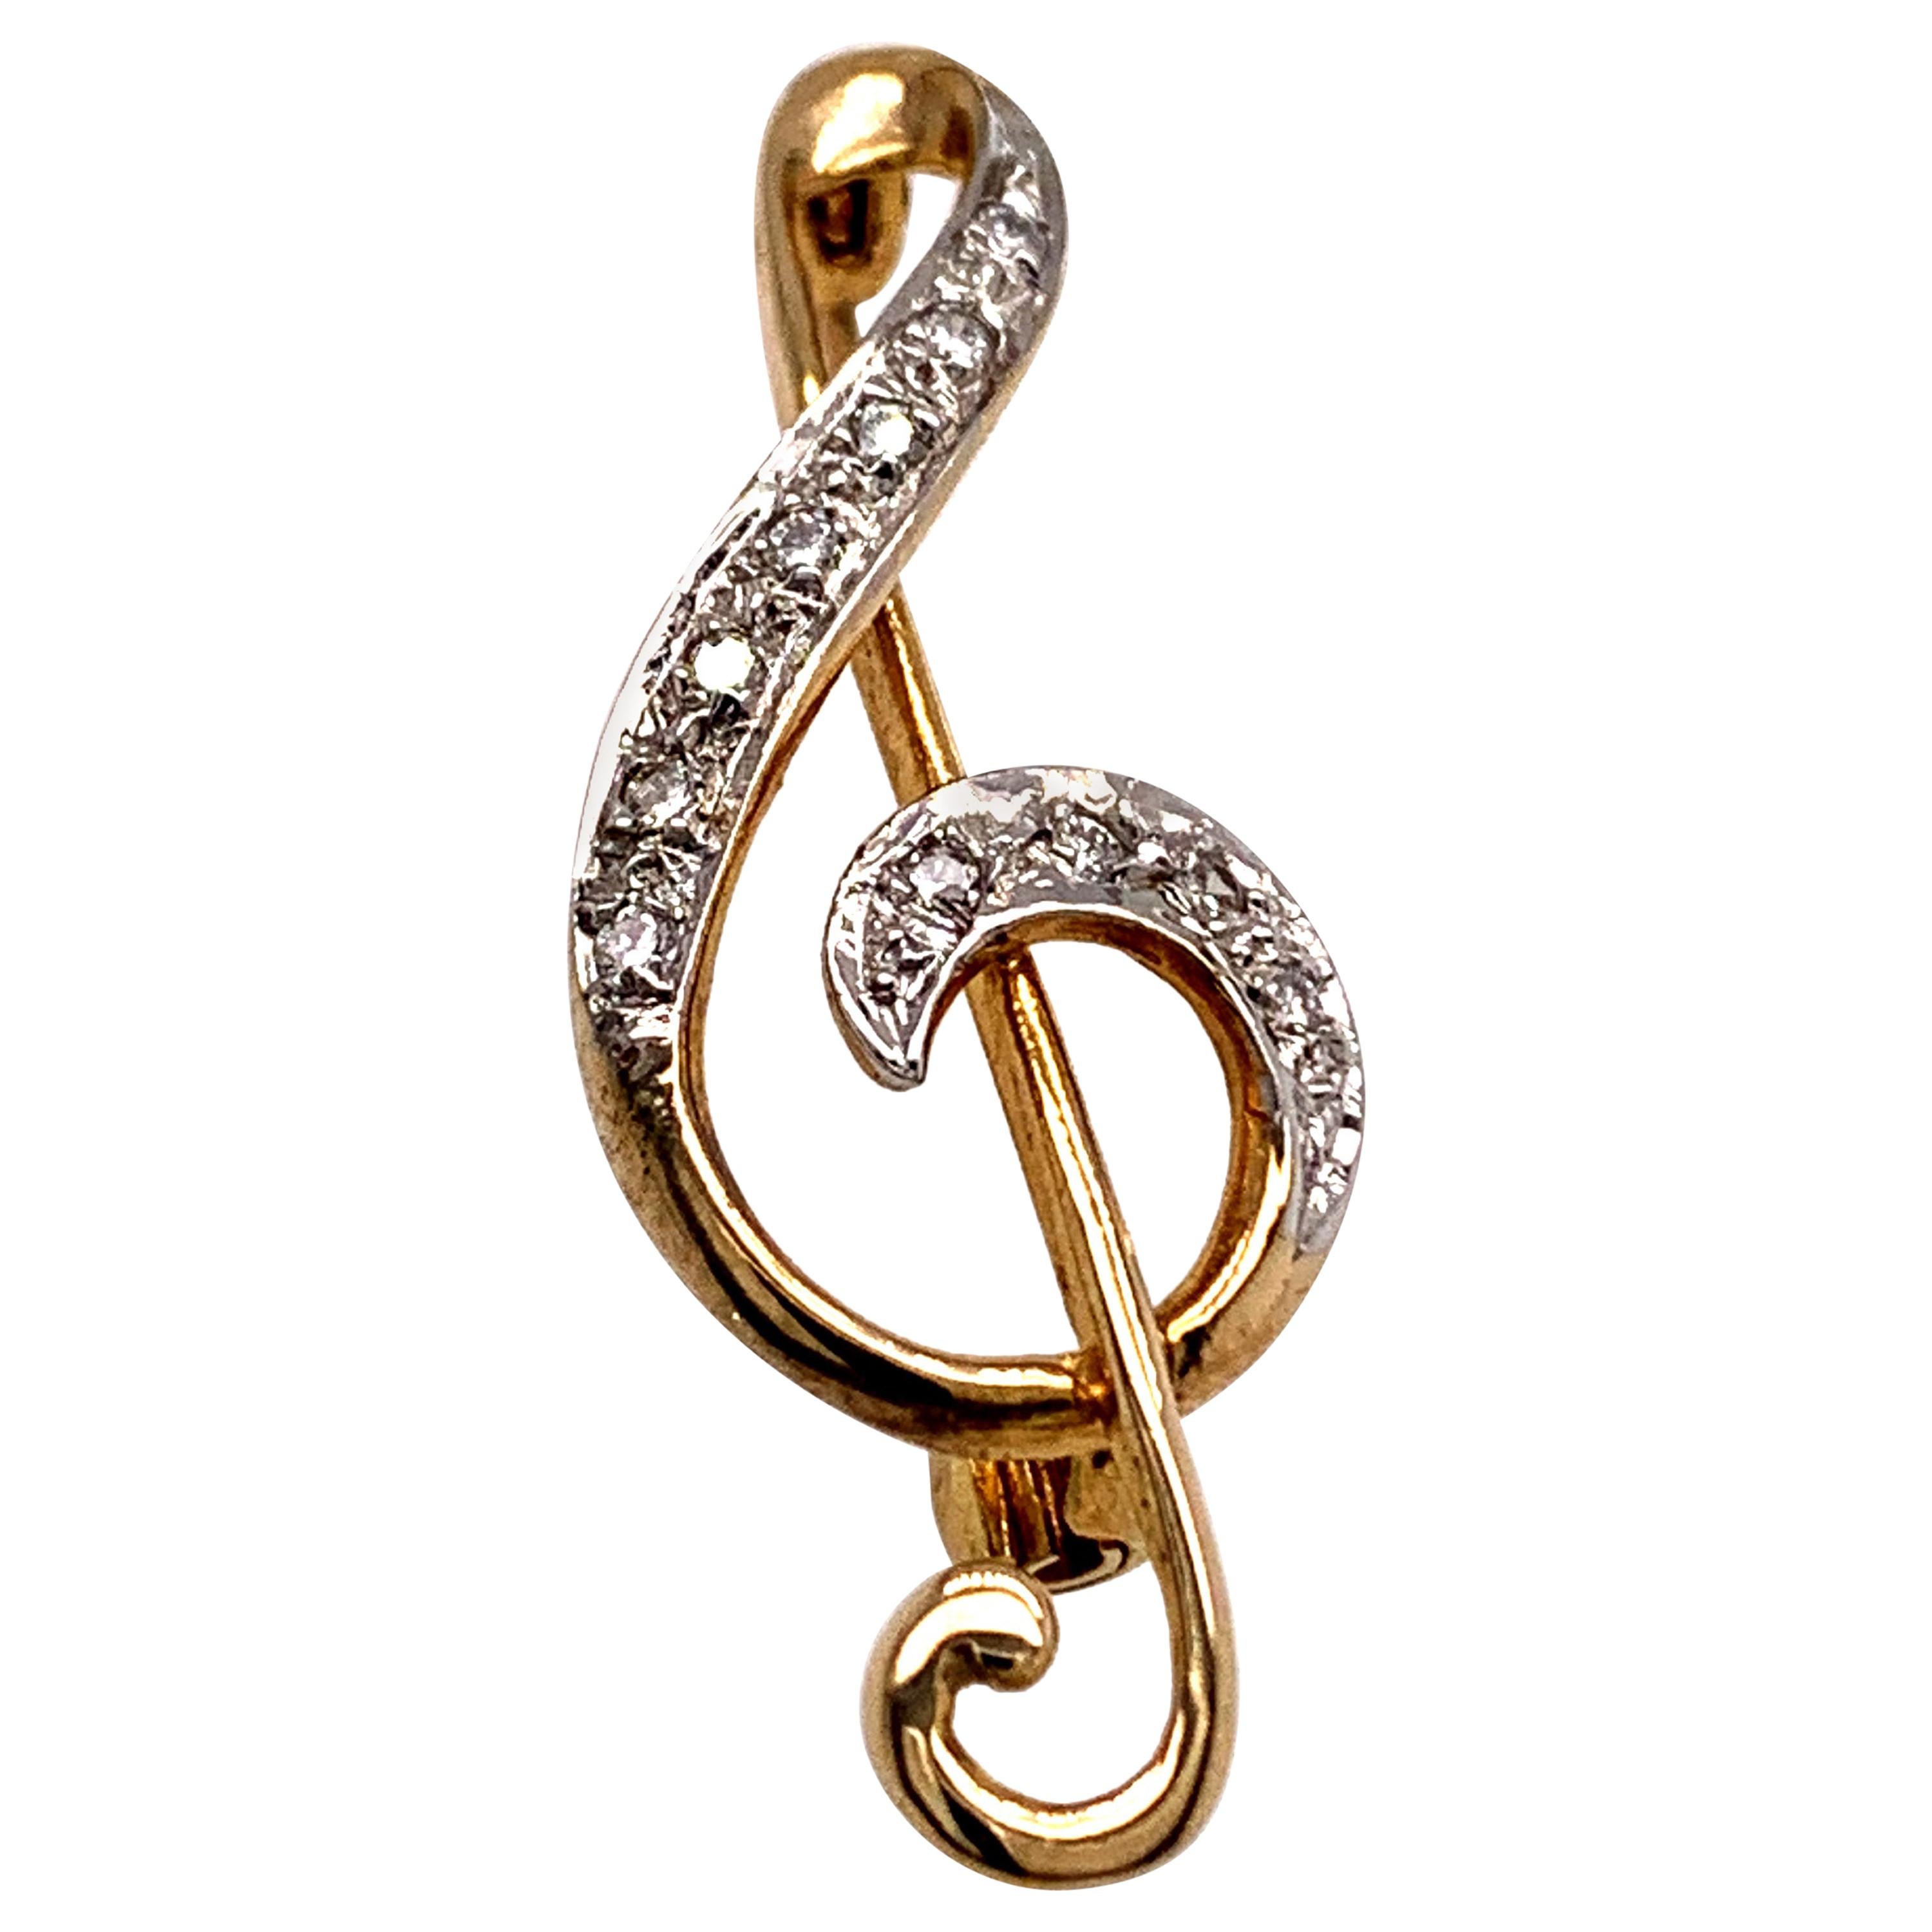 Antique Gold and Diamond Musical Clef Pin